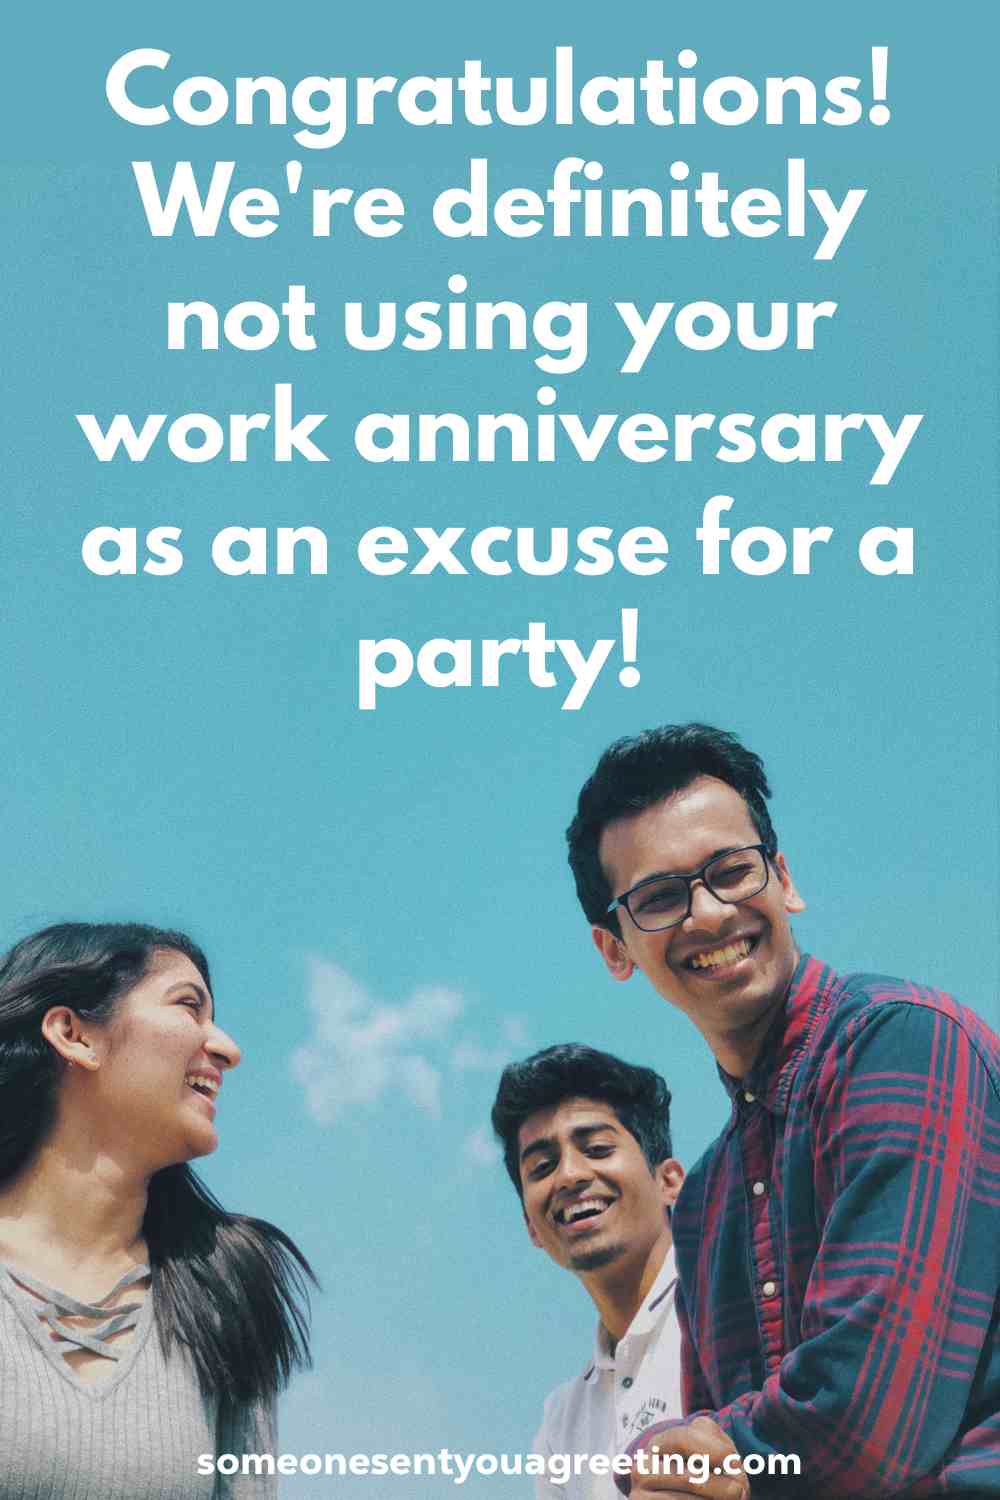 48 Funny Work Anniversary Quotes and Messages - Someone Sent You A Greeting